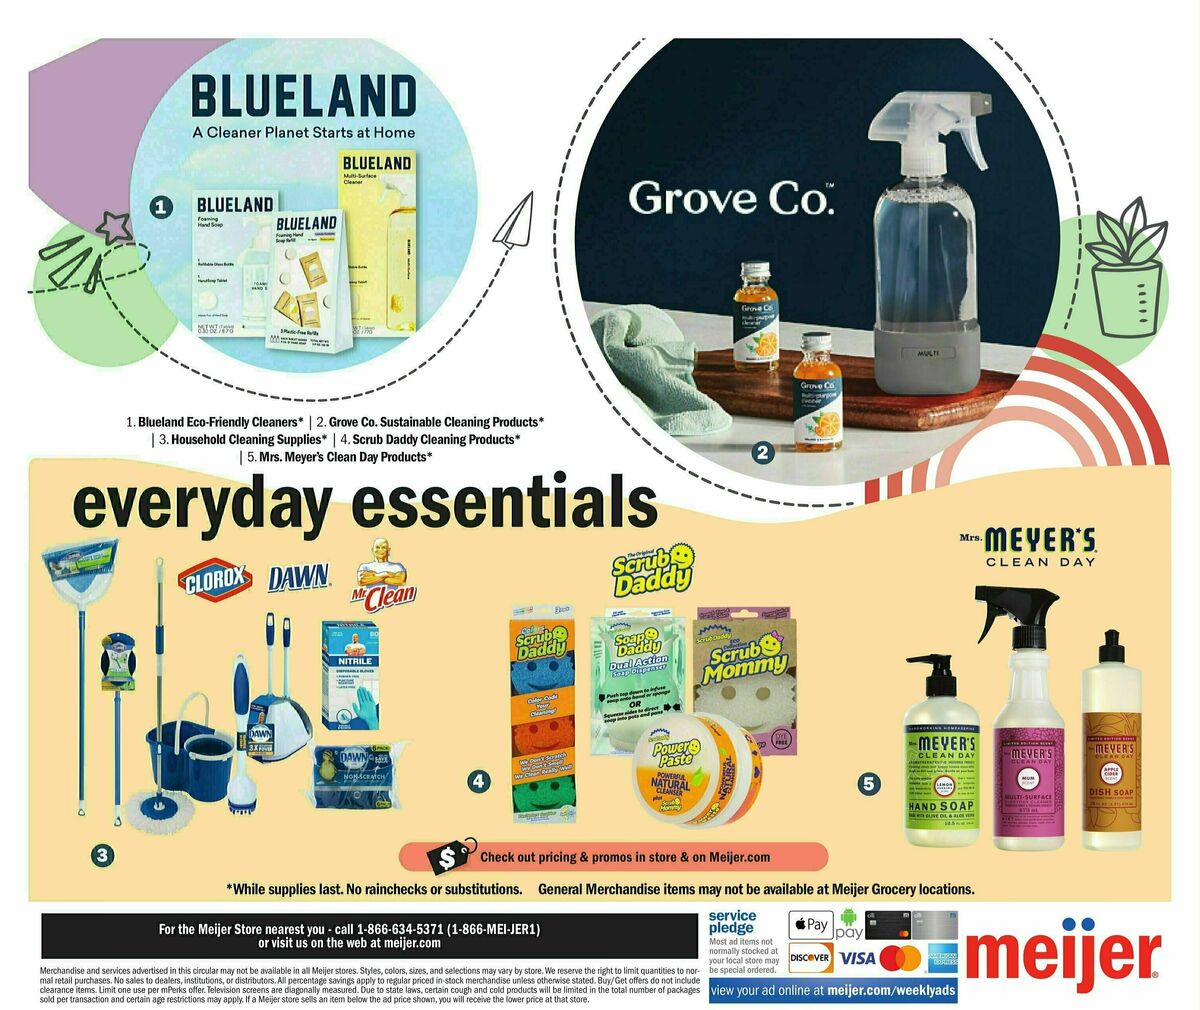 Meijer Back to College Ad Weekly Ad from July 16